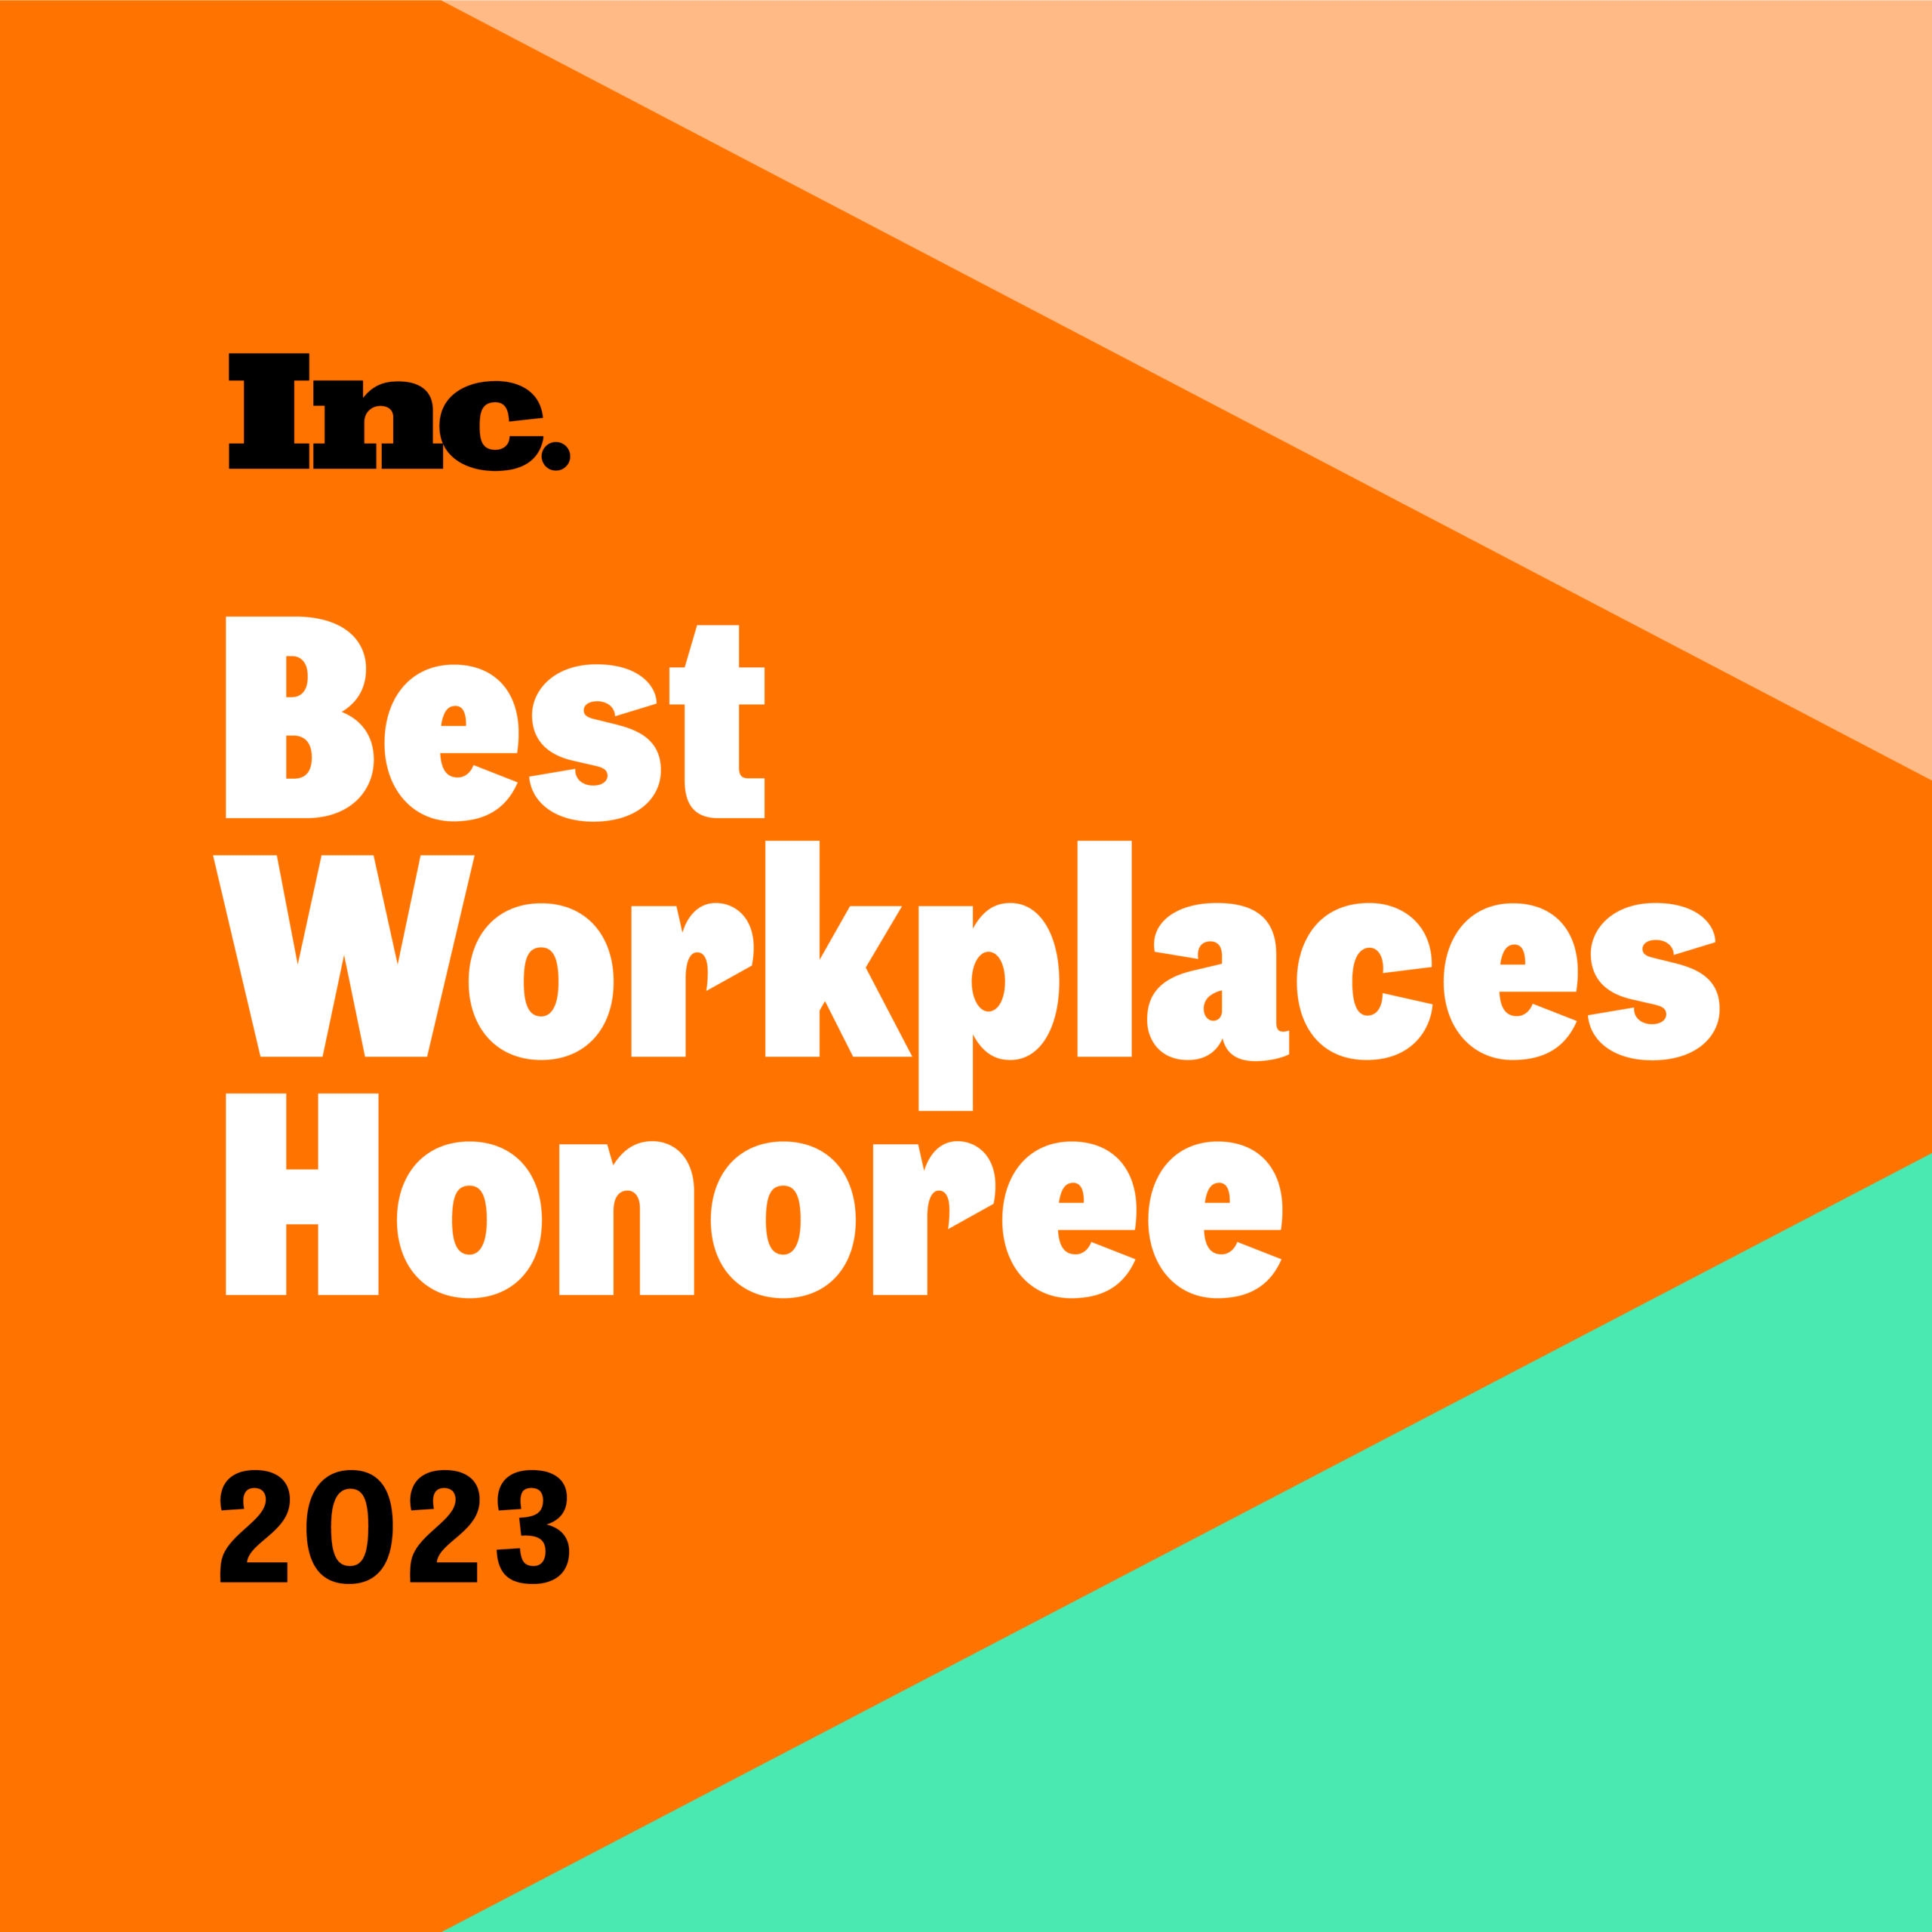 Inc. Best Workplaces Honoree - 2023